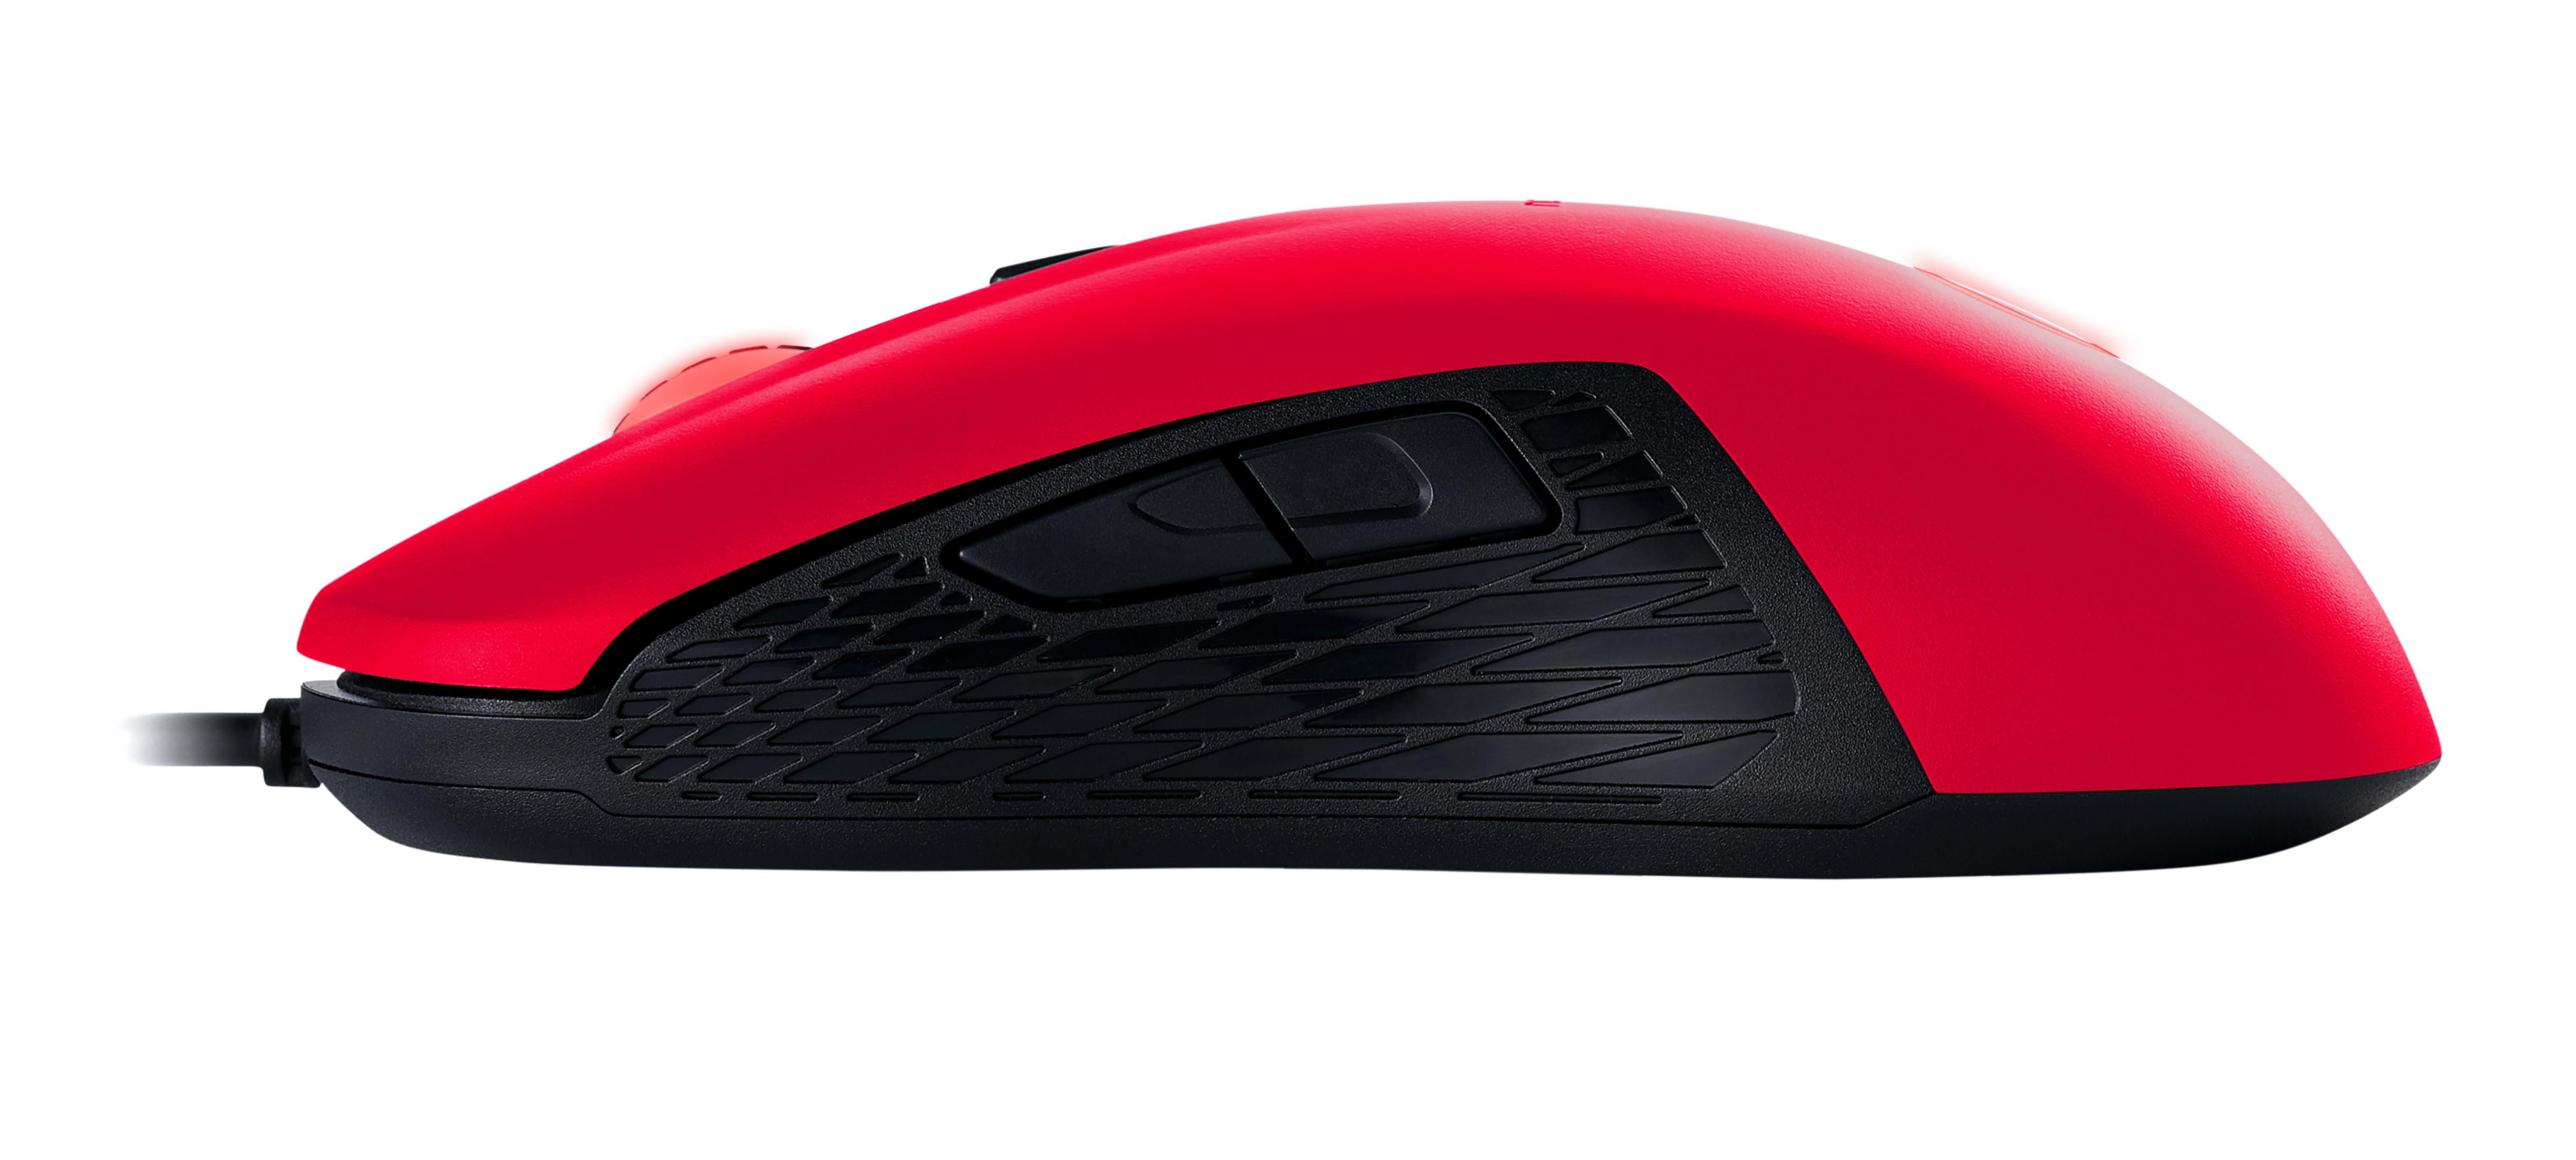 GM-110 GAMING Maus, MOUSE NA374445 Rot RED PC NACON